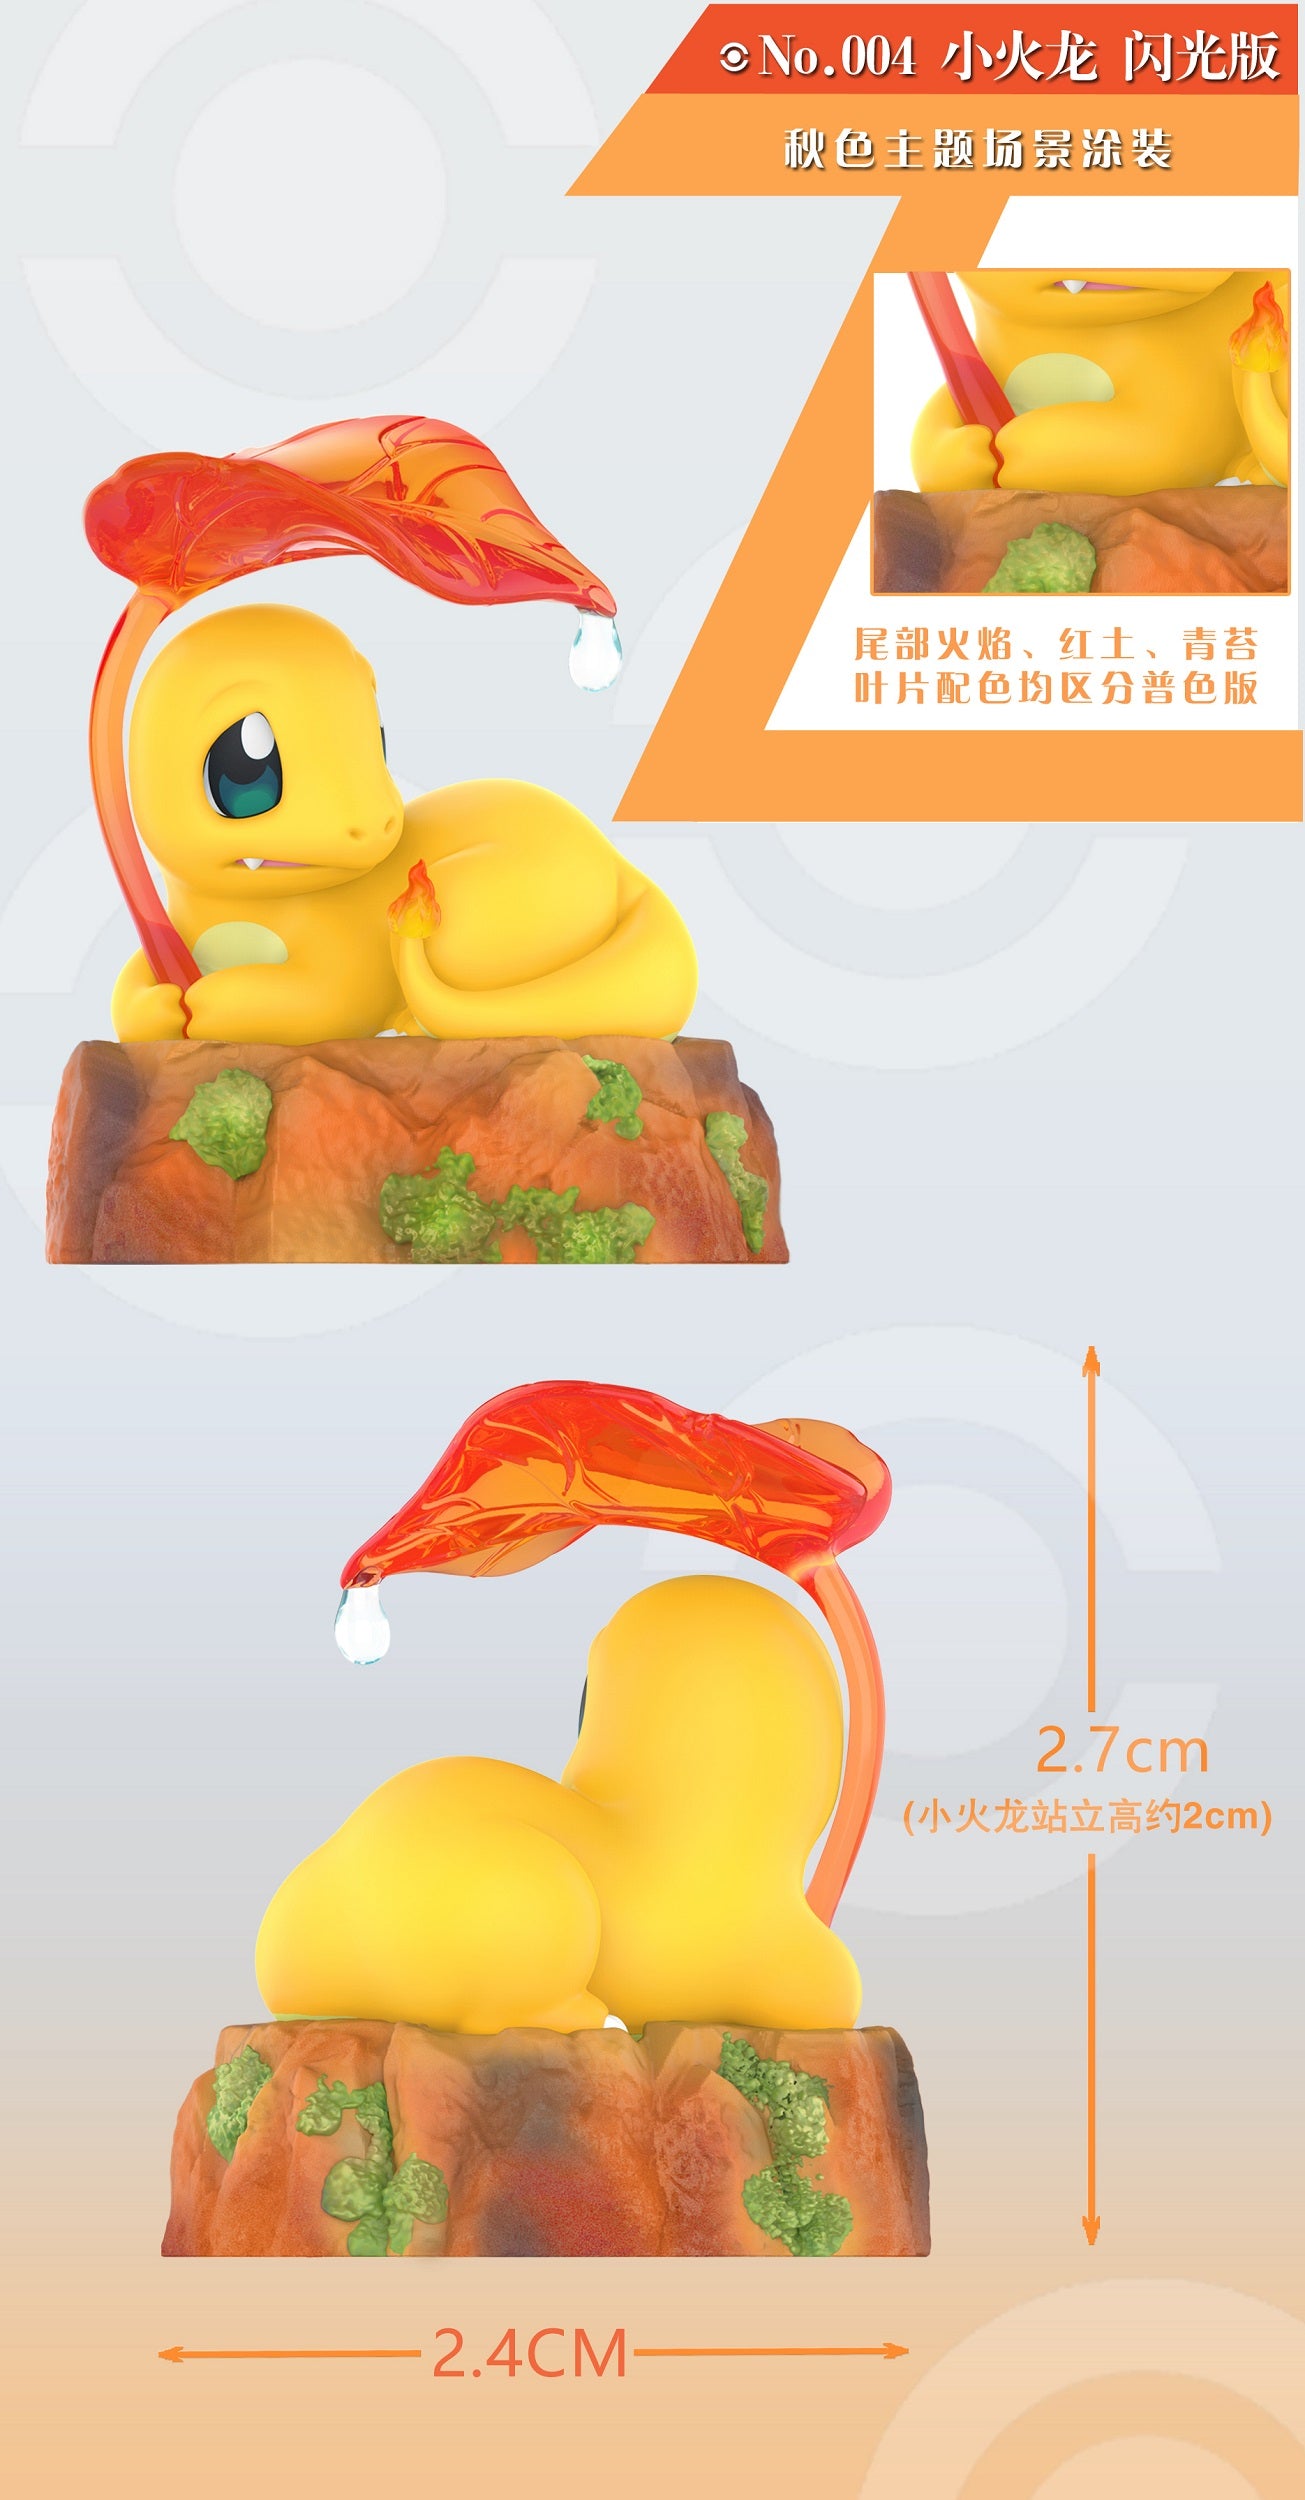 〖Sold Out〗Pokemon Scale World Kanto Region Ash 1:20 - Lucky wings Studio